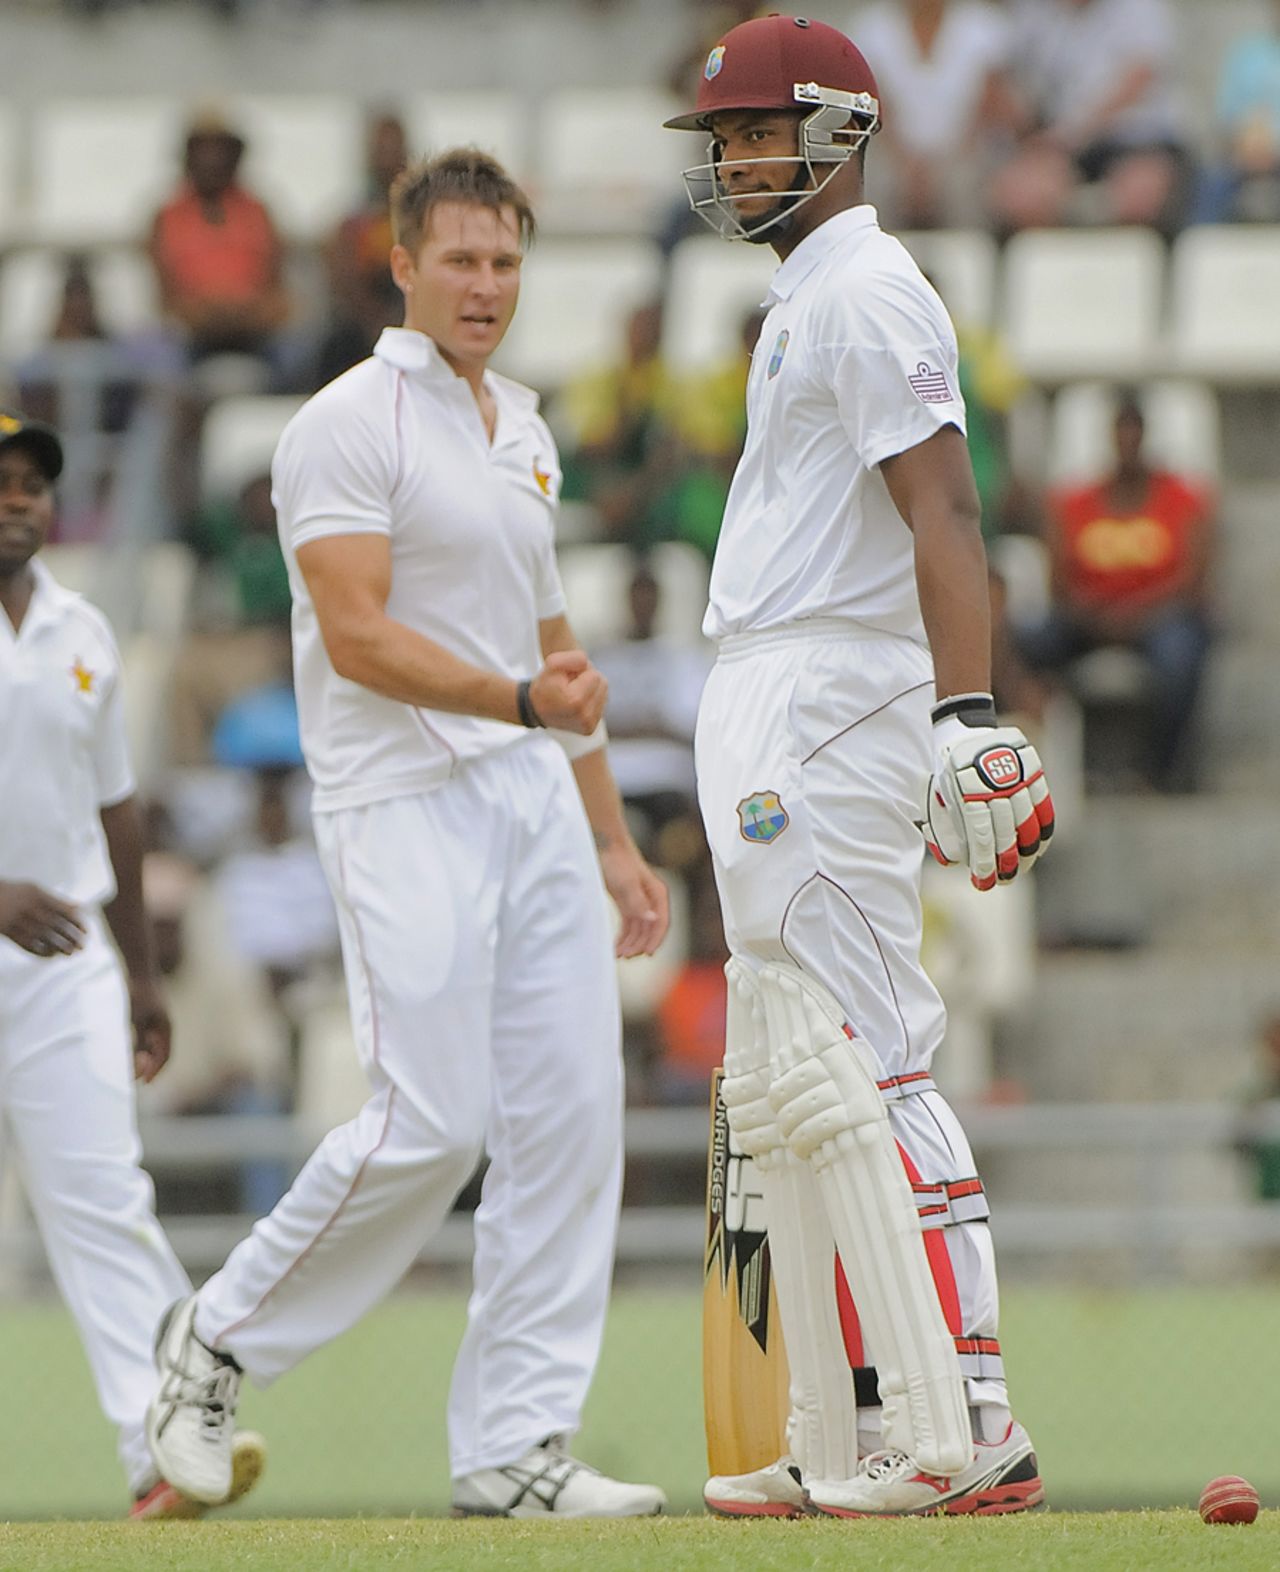 Kyle Jarvis celebrates Kieran Powell's dismissal, West Indies v Zimbabwe, 2nd Test, Dominica, 1st day, March 21, 2013